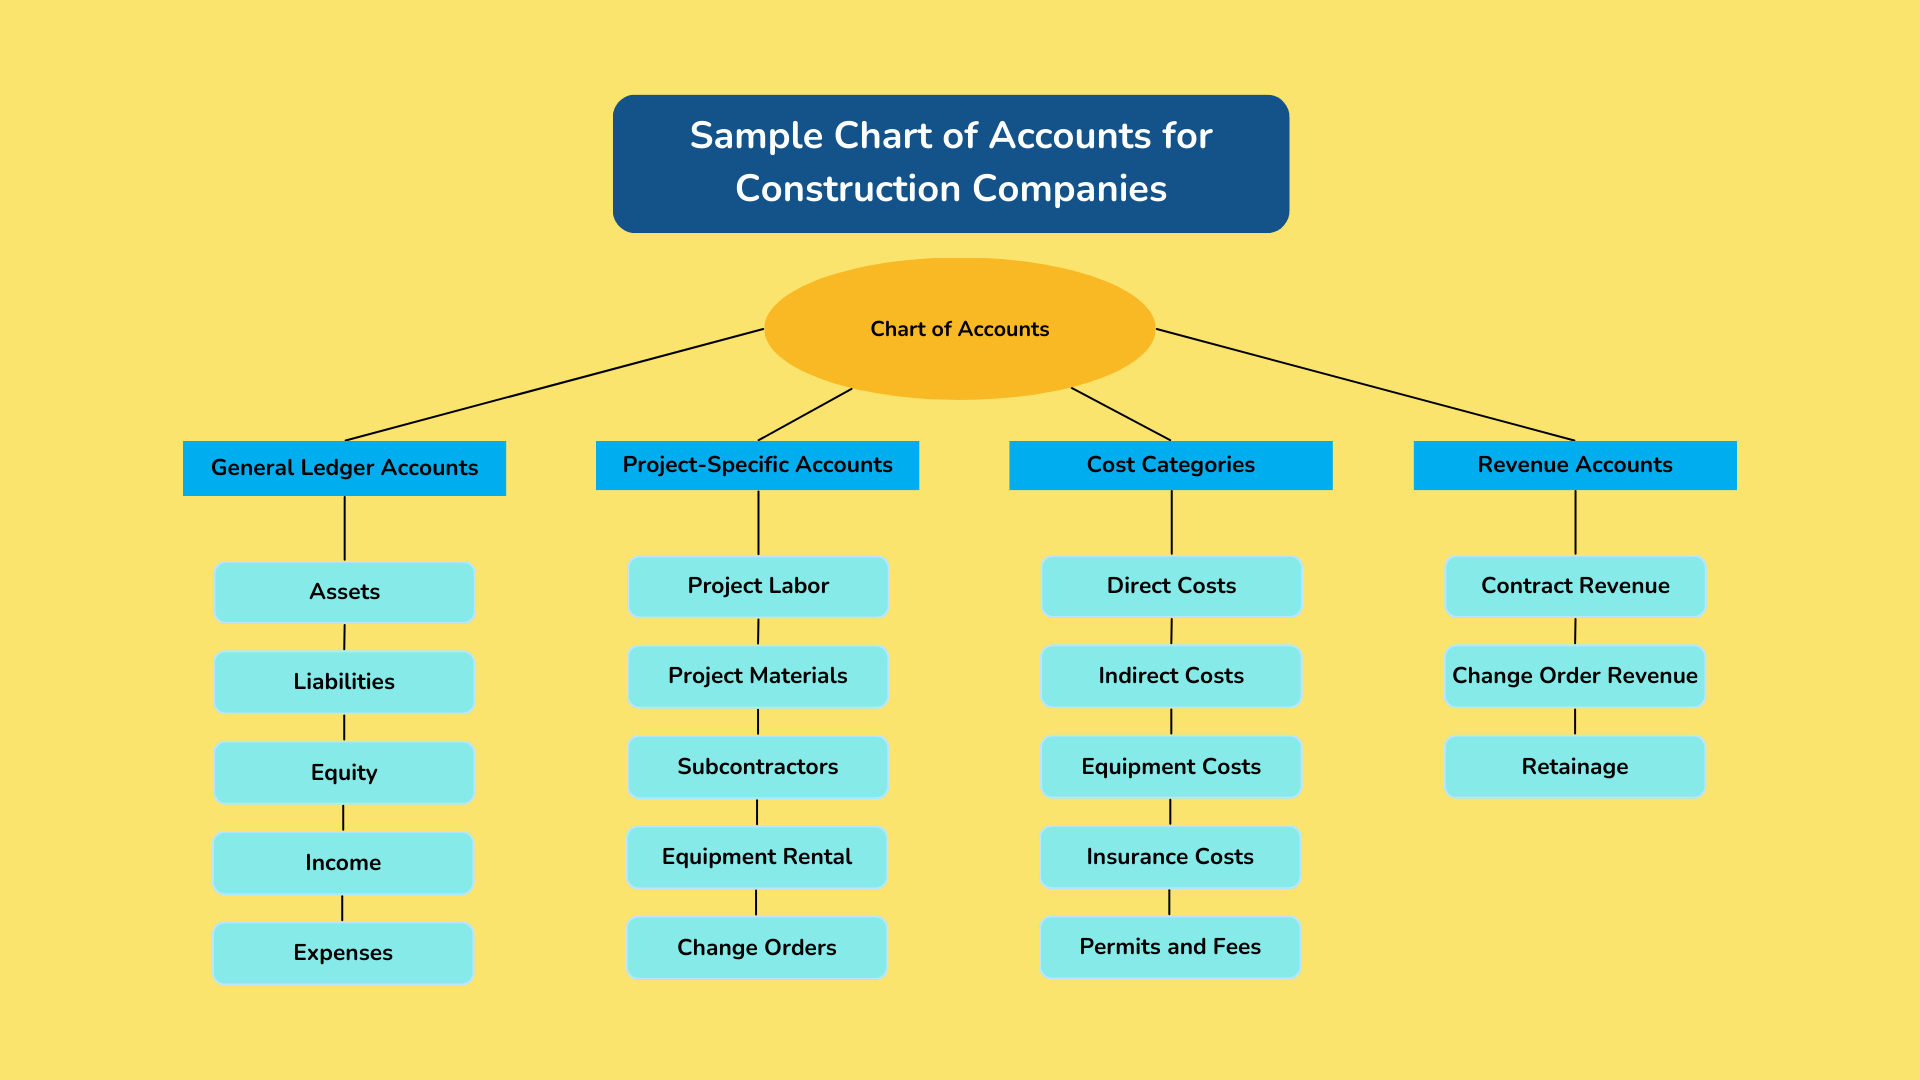 Sample Chart of Accounts for Construction Companies